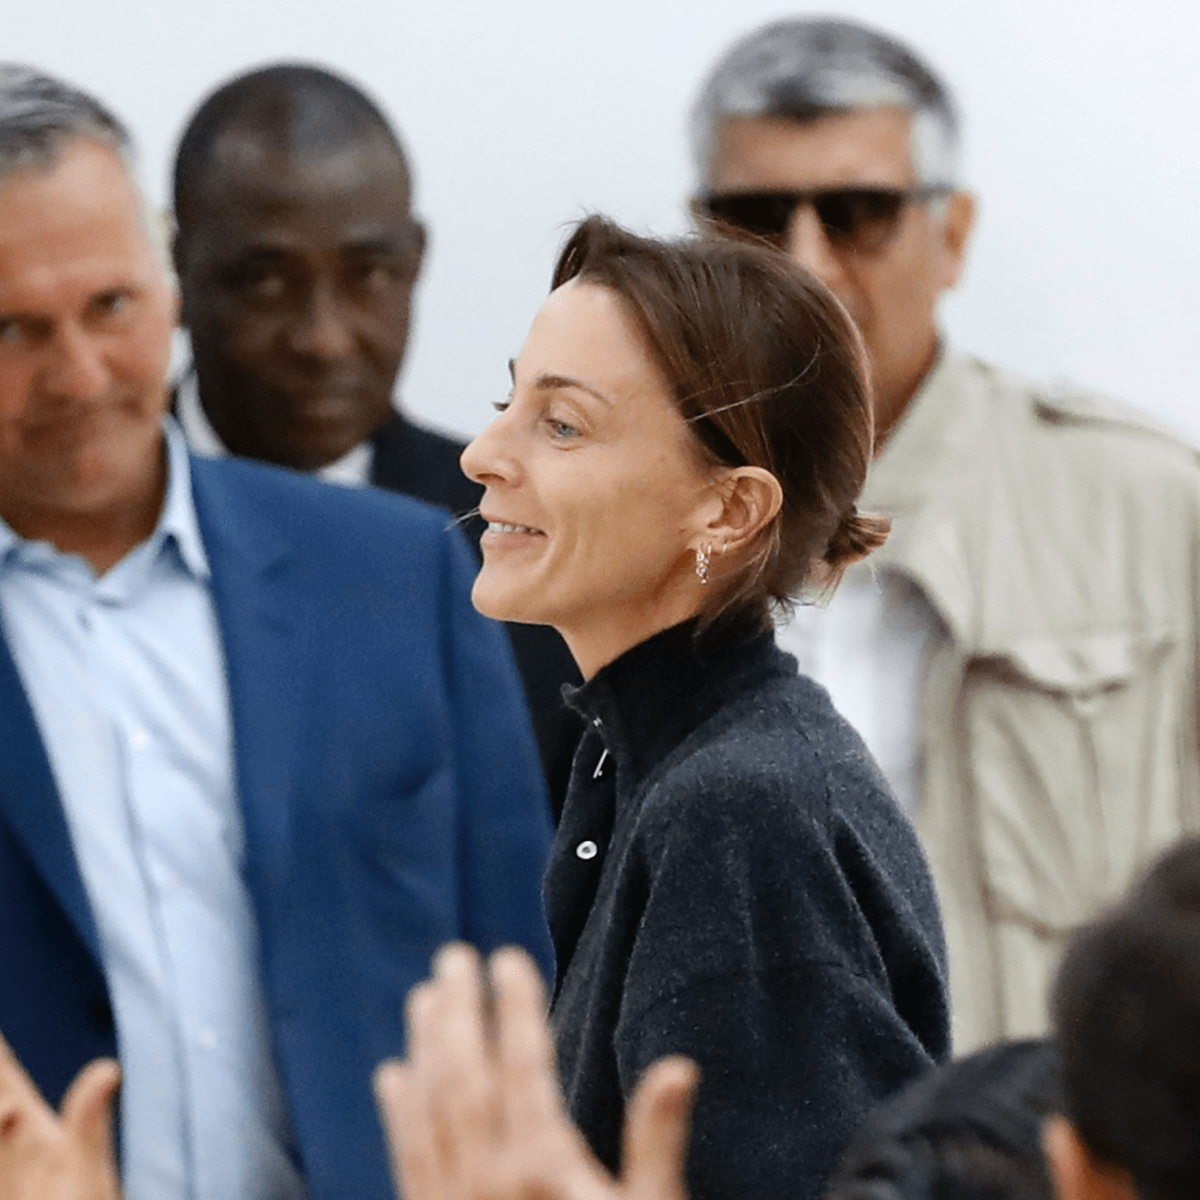 Phoebe Philo unveils 'warm and immensely likeable' Céline